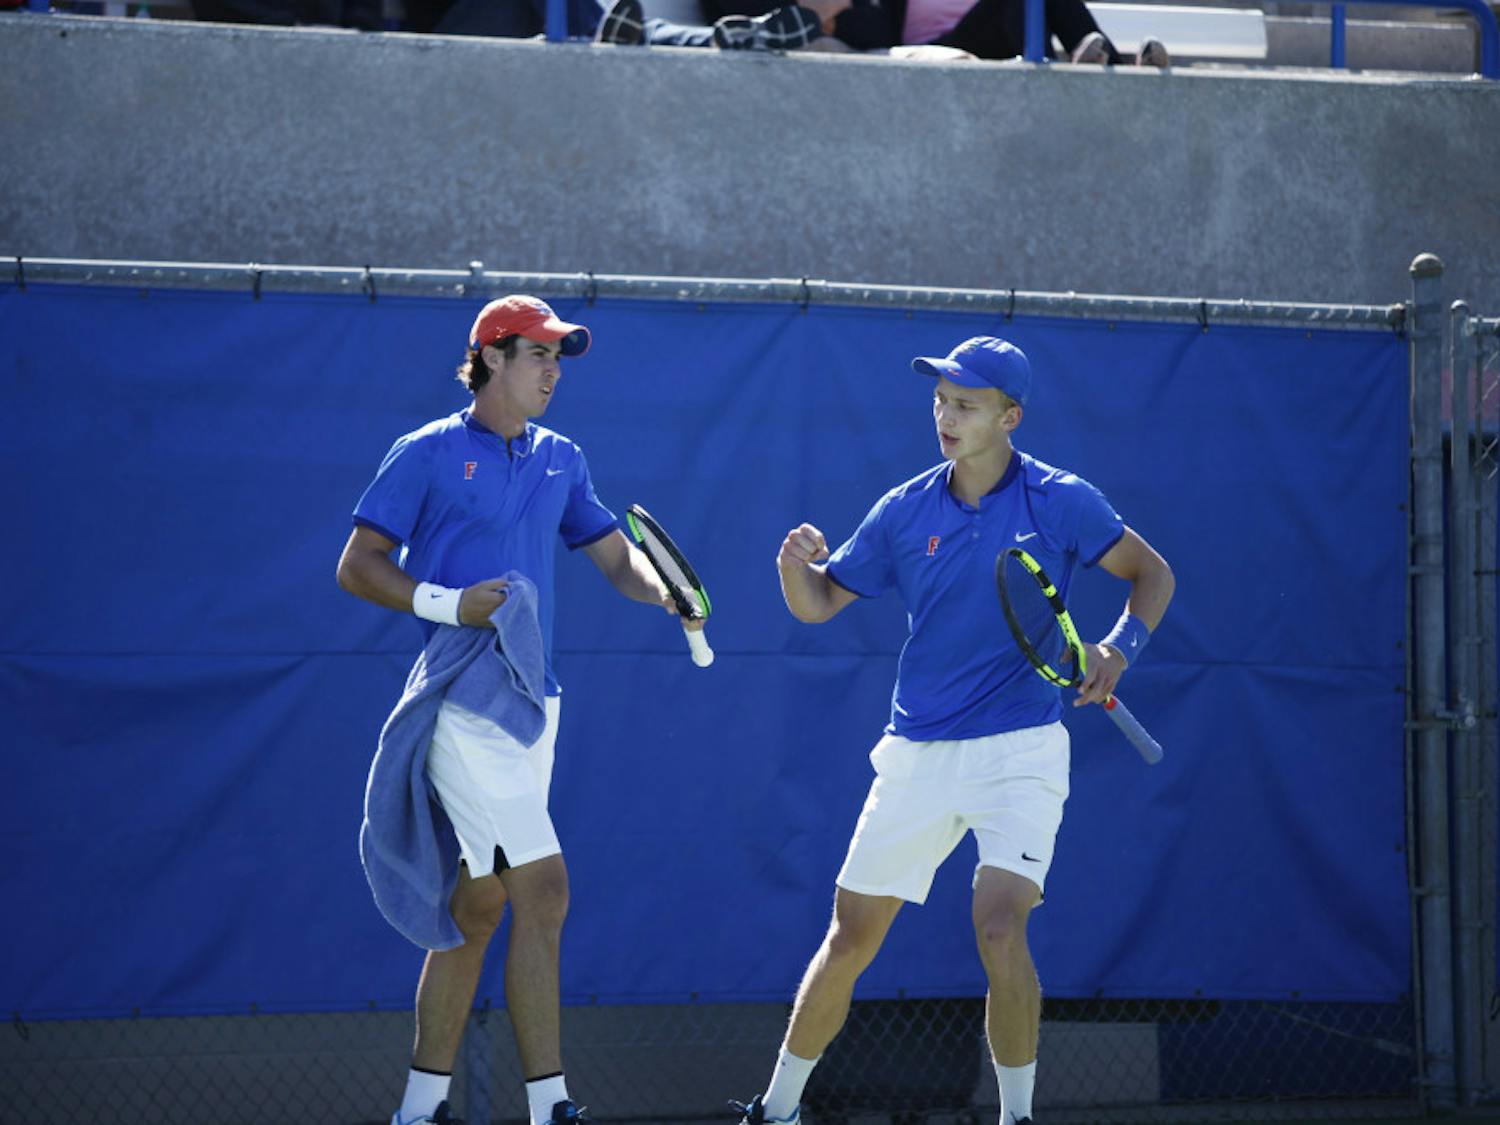 Junior Alfredo Perez (left) was the lone Gator to win his singles match at the NCAA Individual Championships. Sophomore Johannes Ingildsen dropped his match, but will be back in action with Perez in doubles on Thursday. 